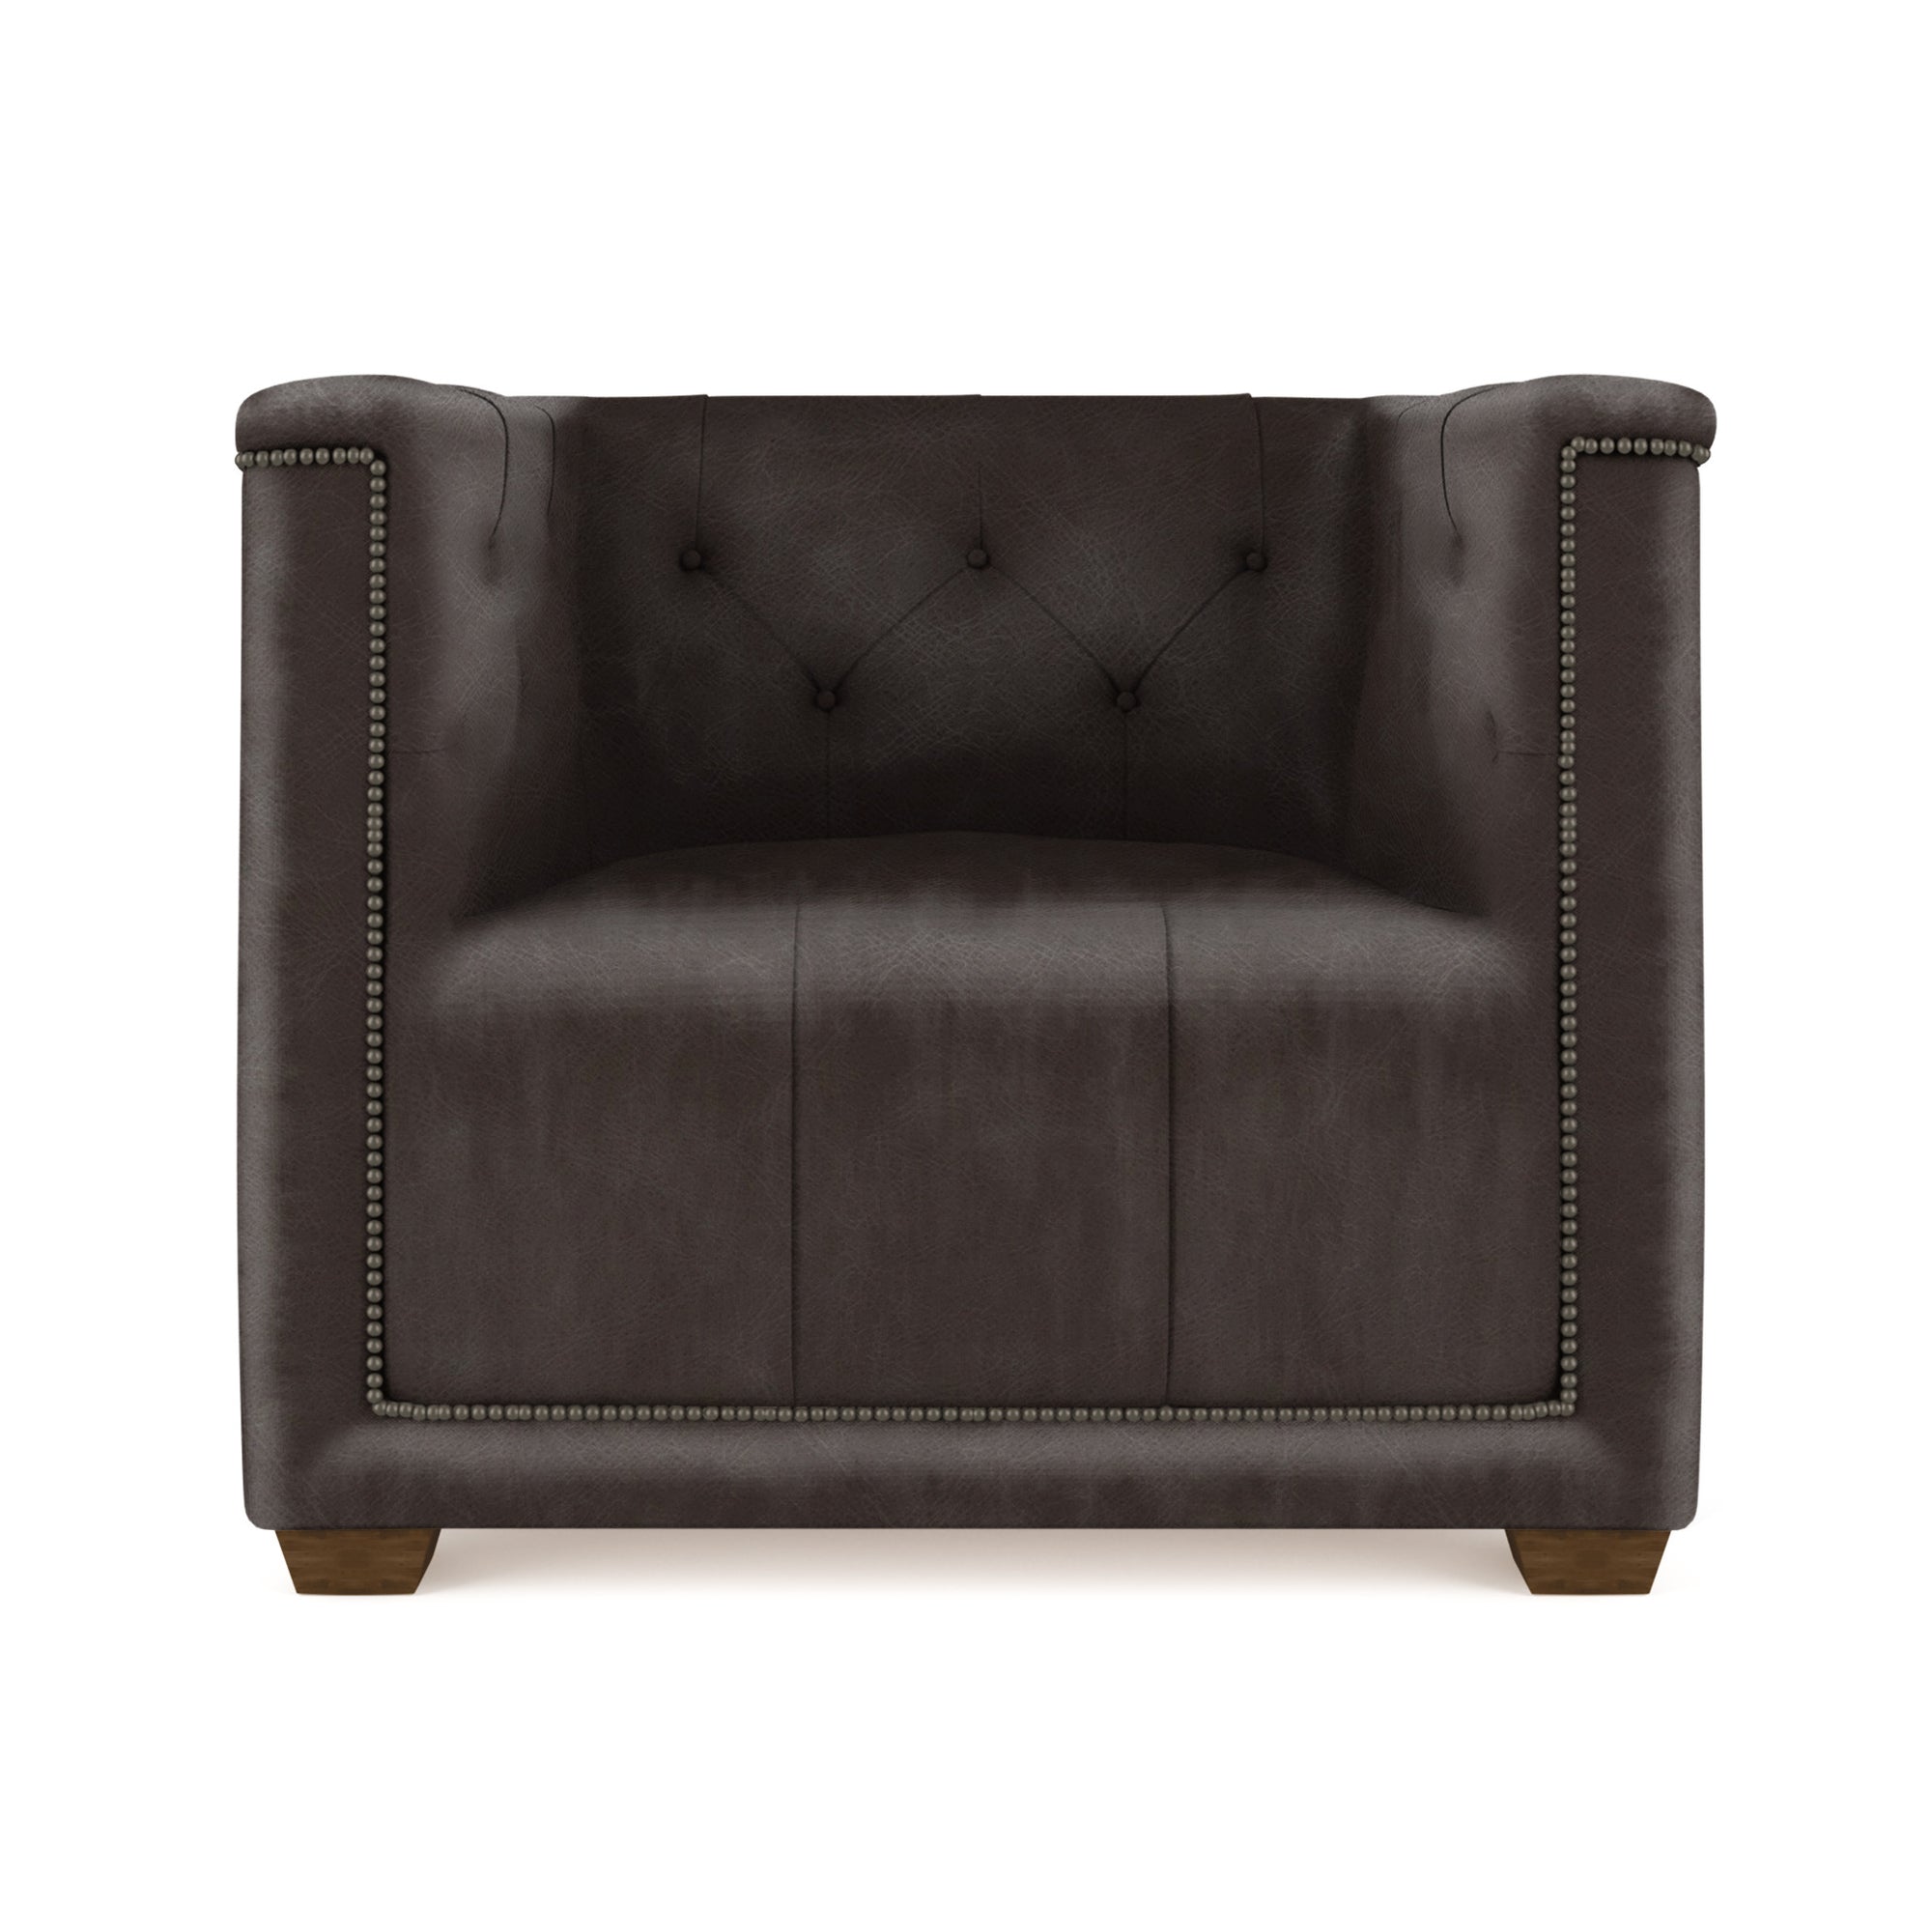 Hudson Chair - Chocolate Vintage Leather